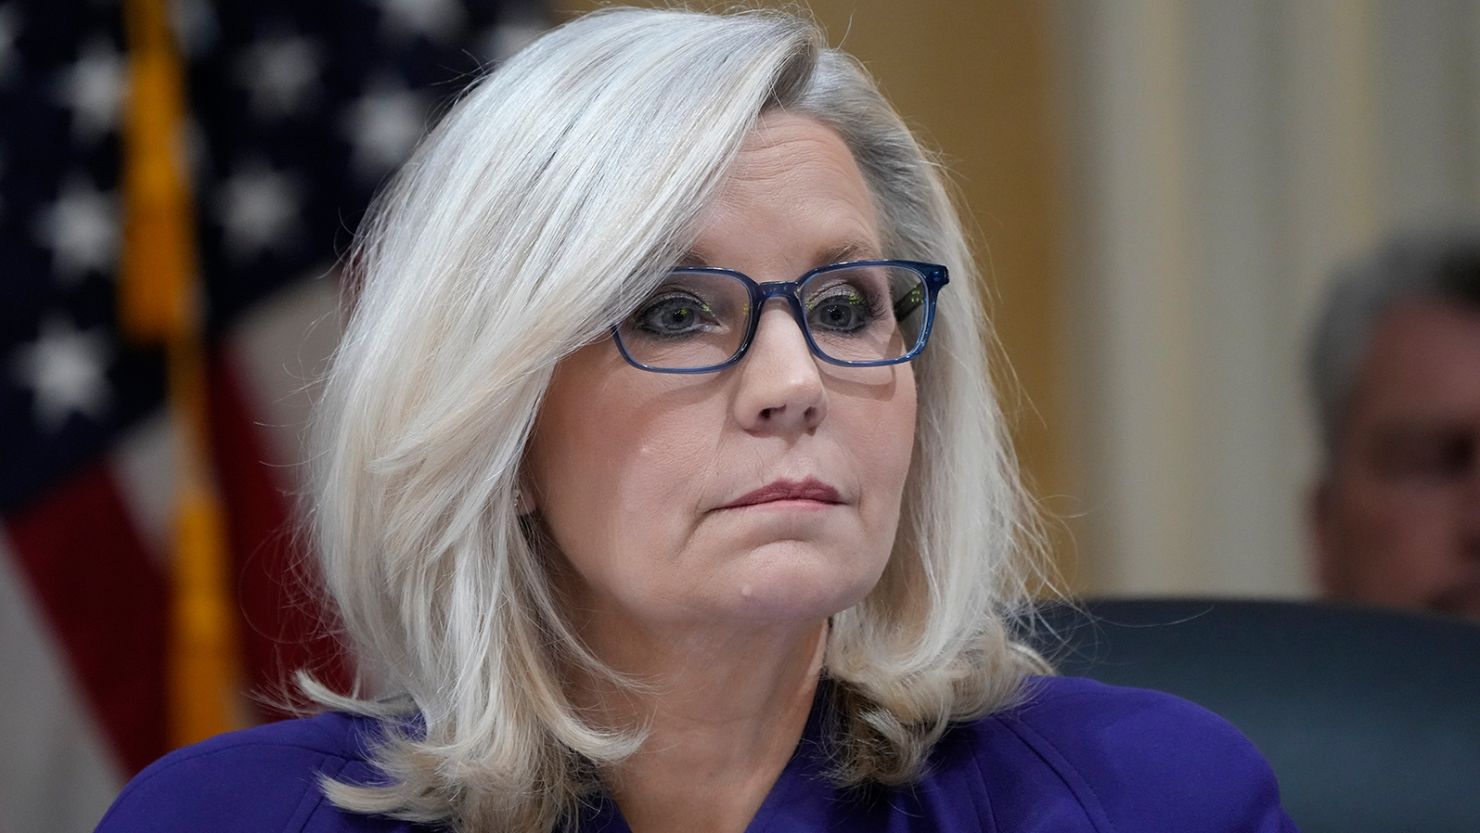 Vice Chair Rep. Liz Cheney, R-Wyo., listens as the House select committee investigating the Jan. 6 attack on the U.S. Capitol holds its final meeting on Capitol Hill in Washington on December 19, 2022.